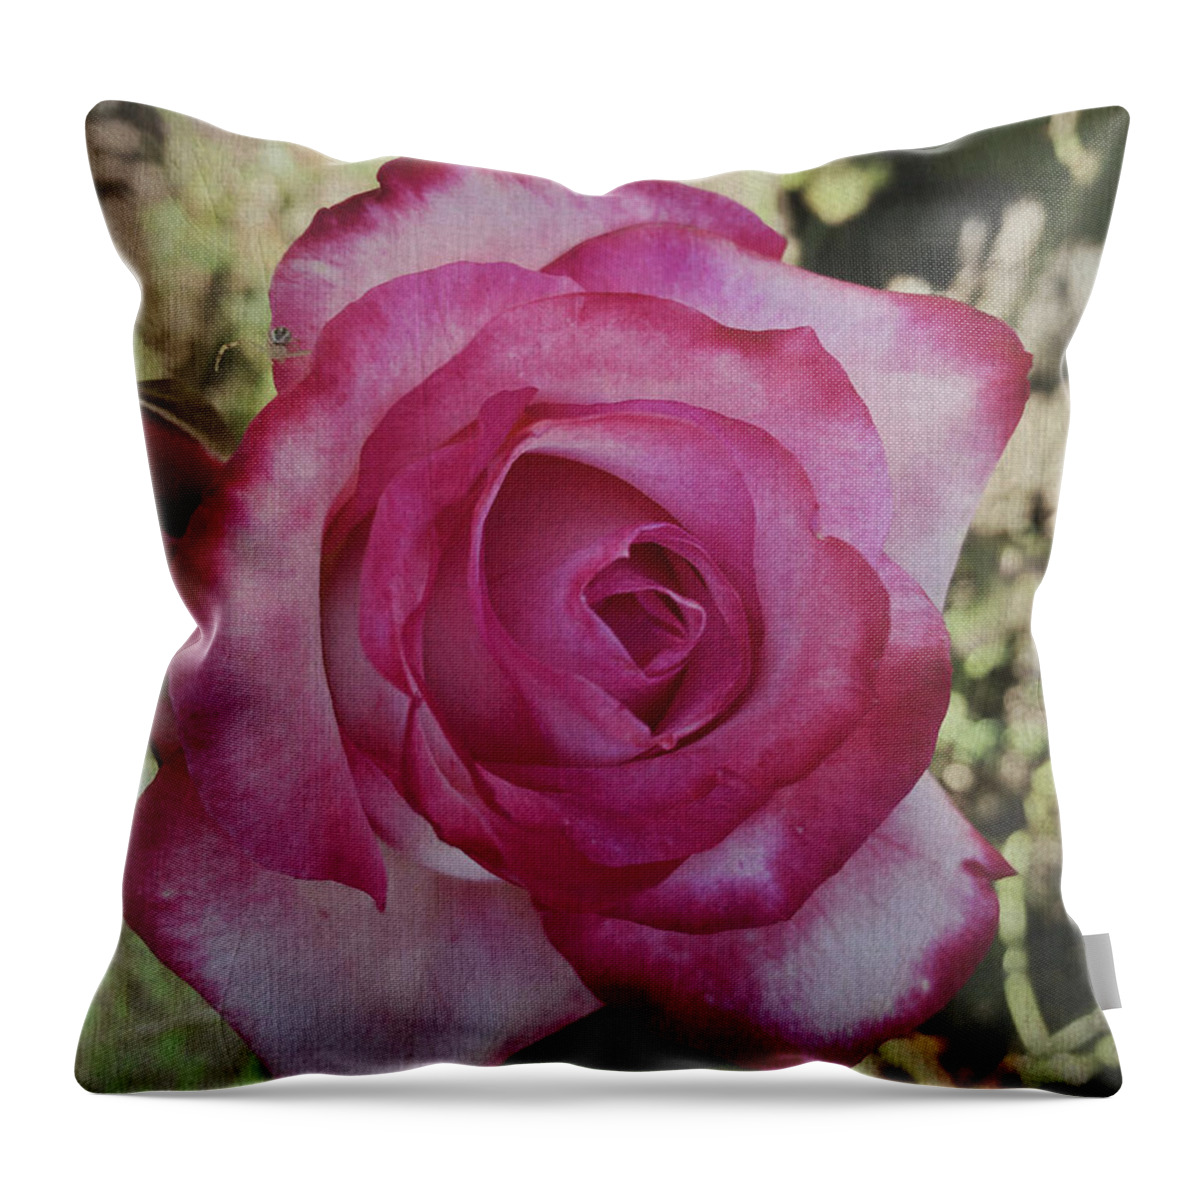 Outdoors Throw Pillow featuring the digital art The Rose by Silvia Marcoschamer